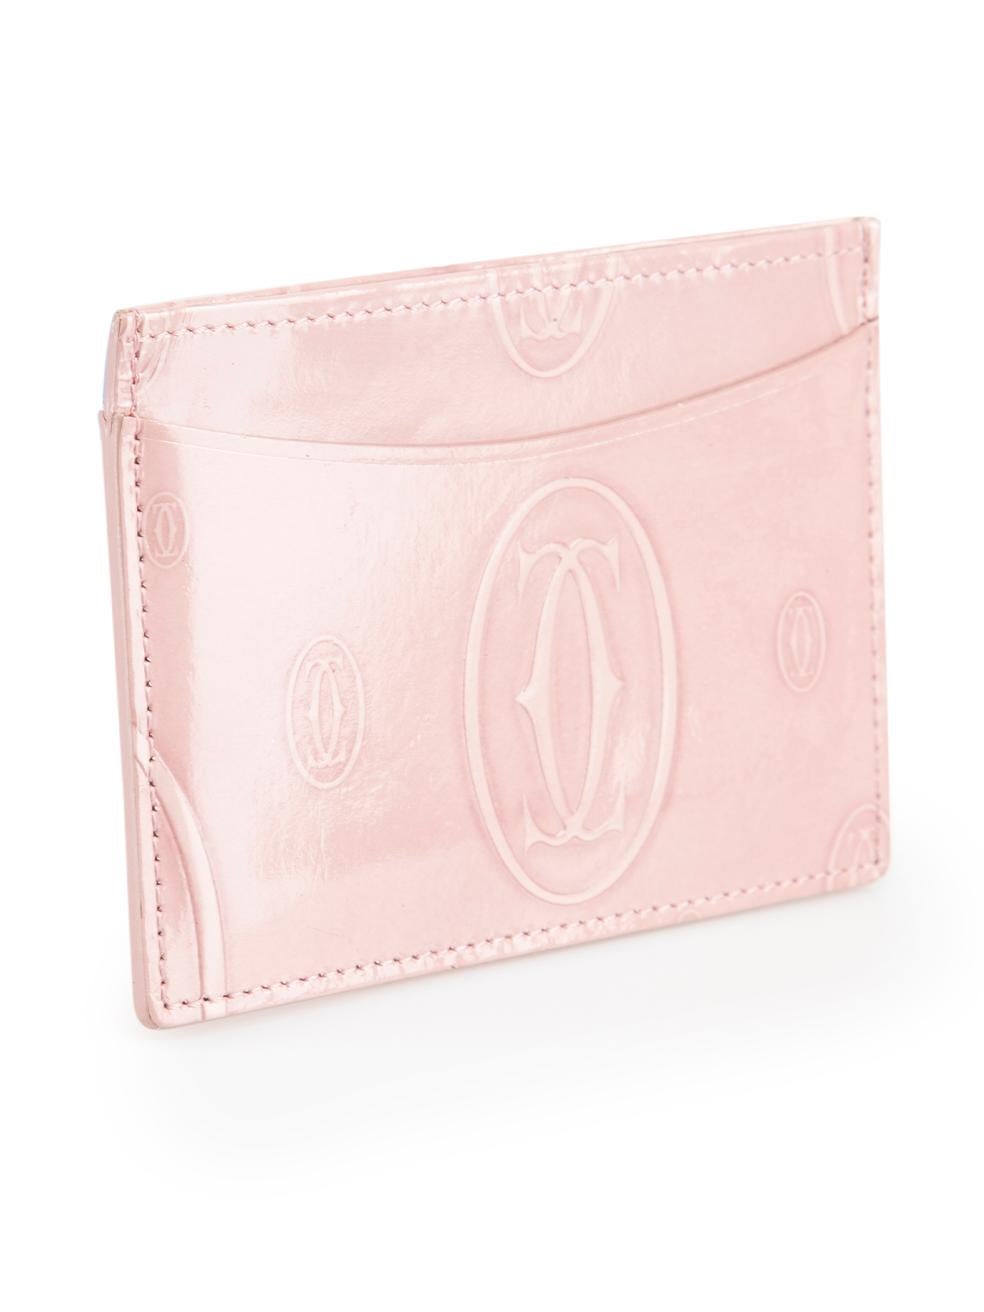 CONDITION is Good. Minor wear to card holder is evident. Light wear to leather finish with some very mild creasing and scuffs seen across the surface on this used Cartier designer resale item.
 
Details
Pink
Patent leather
Card holder
Logo embossed